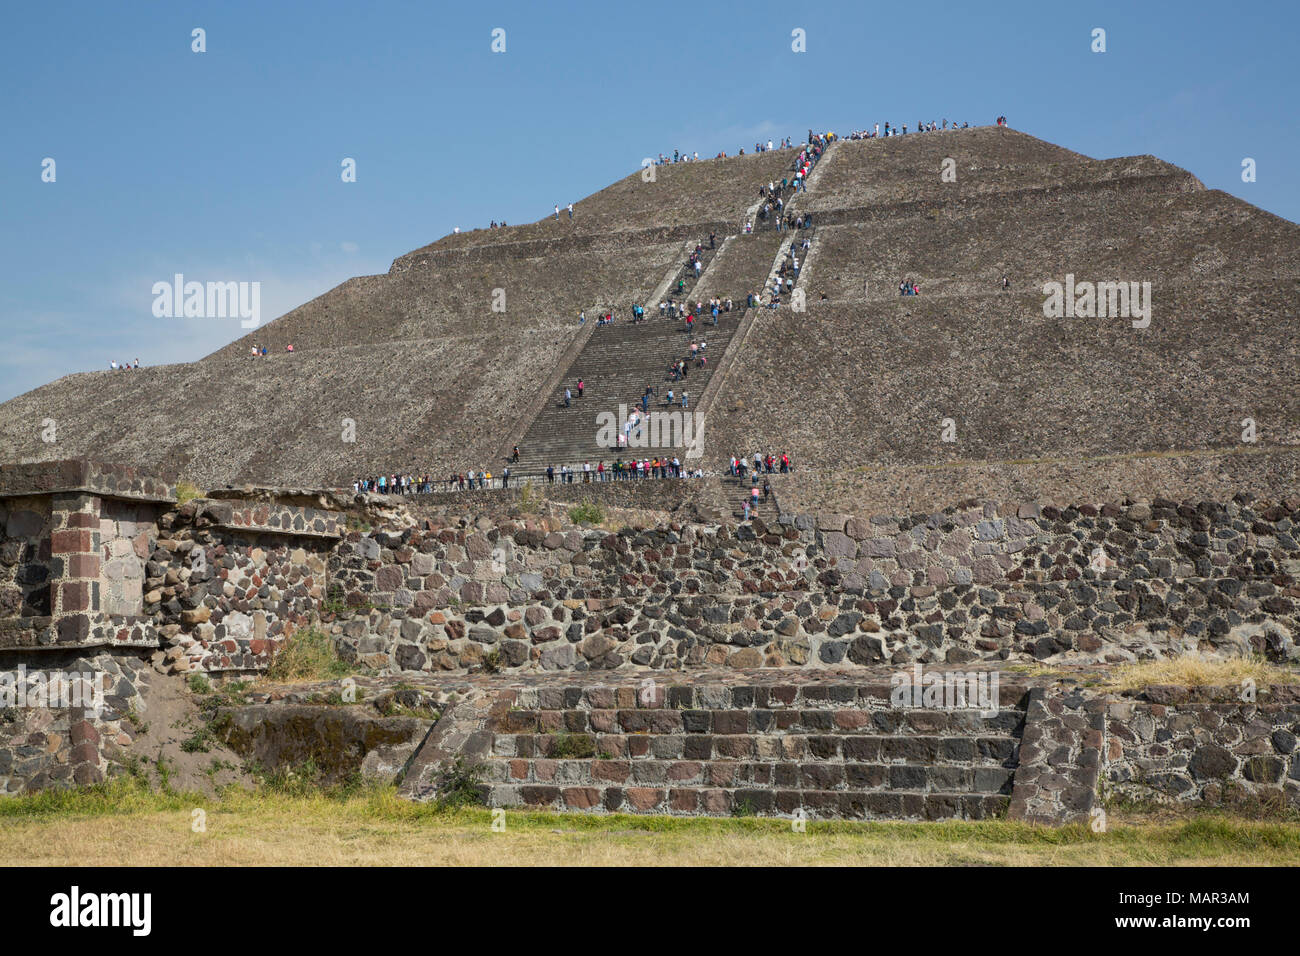 Pyramid of the Sun, Teotihuacan Archaeological Zone, UNESCO World Heritage Site, State of Mexico, Mexico, North America Stock Photo